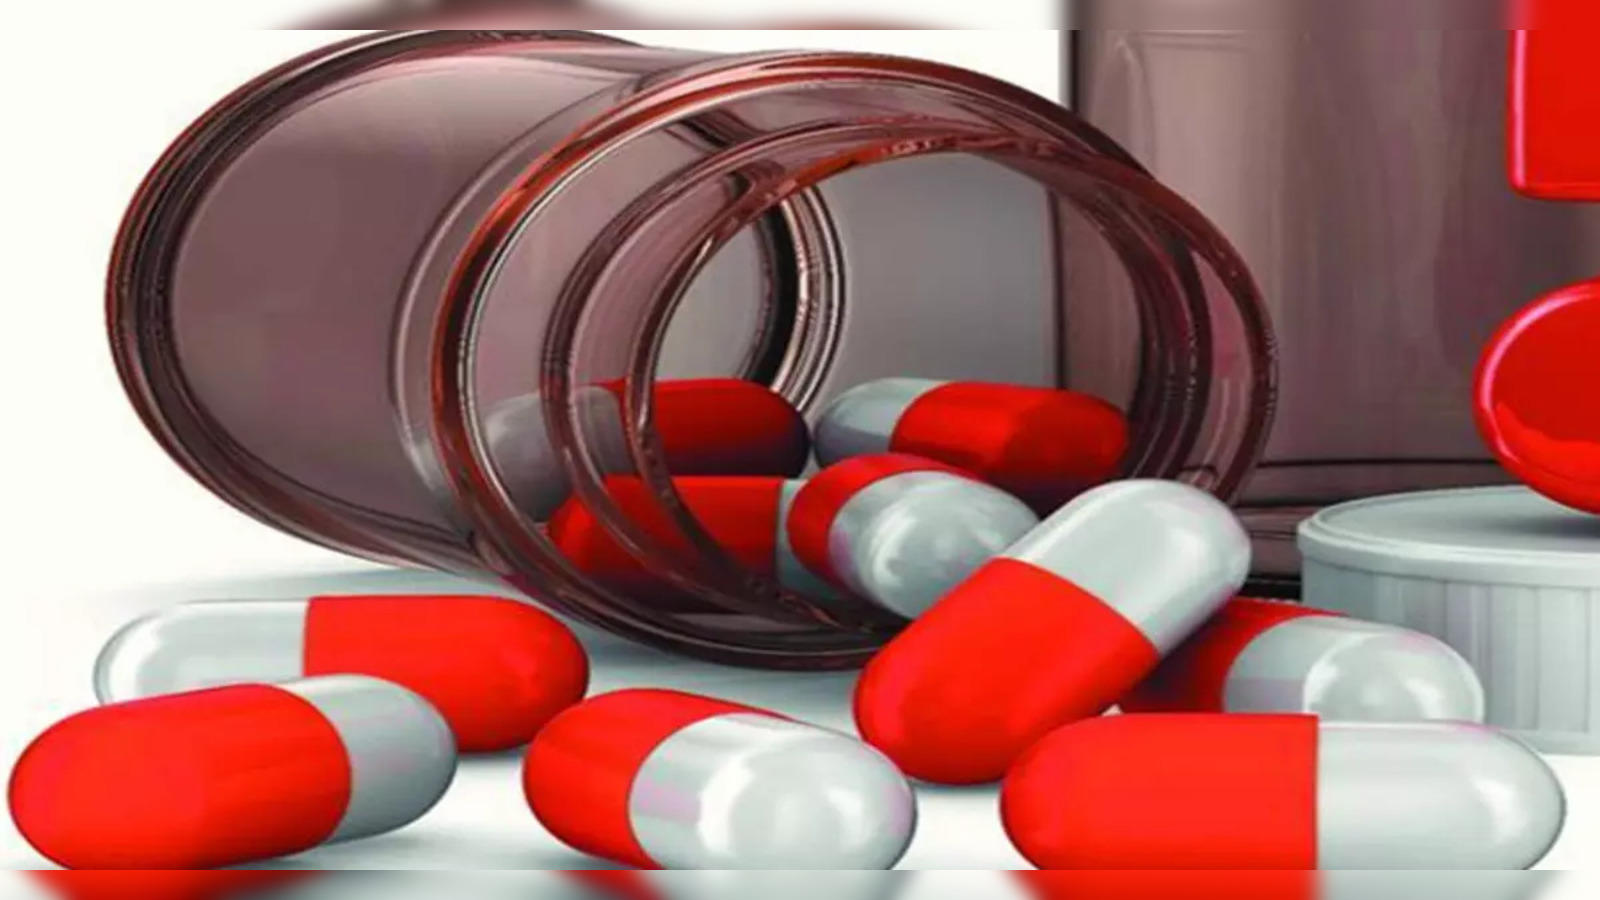 Doctors to be penalised for not prescribing generic drugs, says new